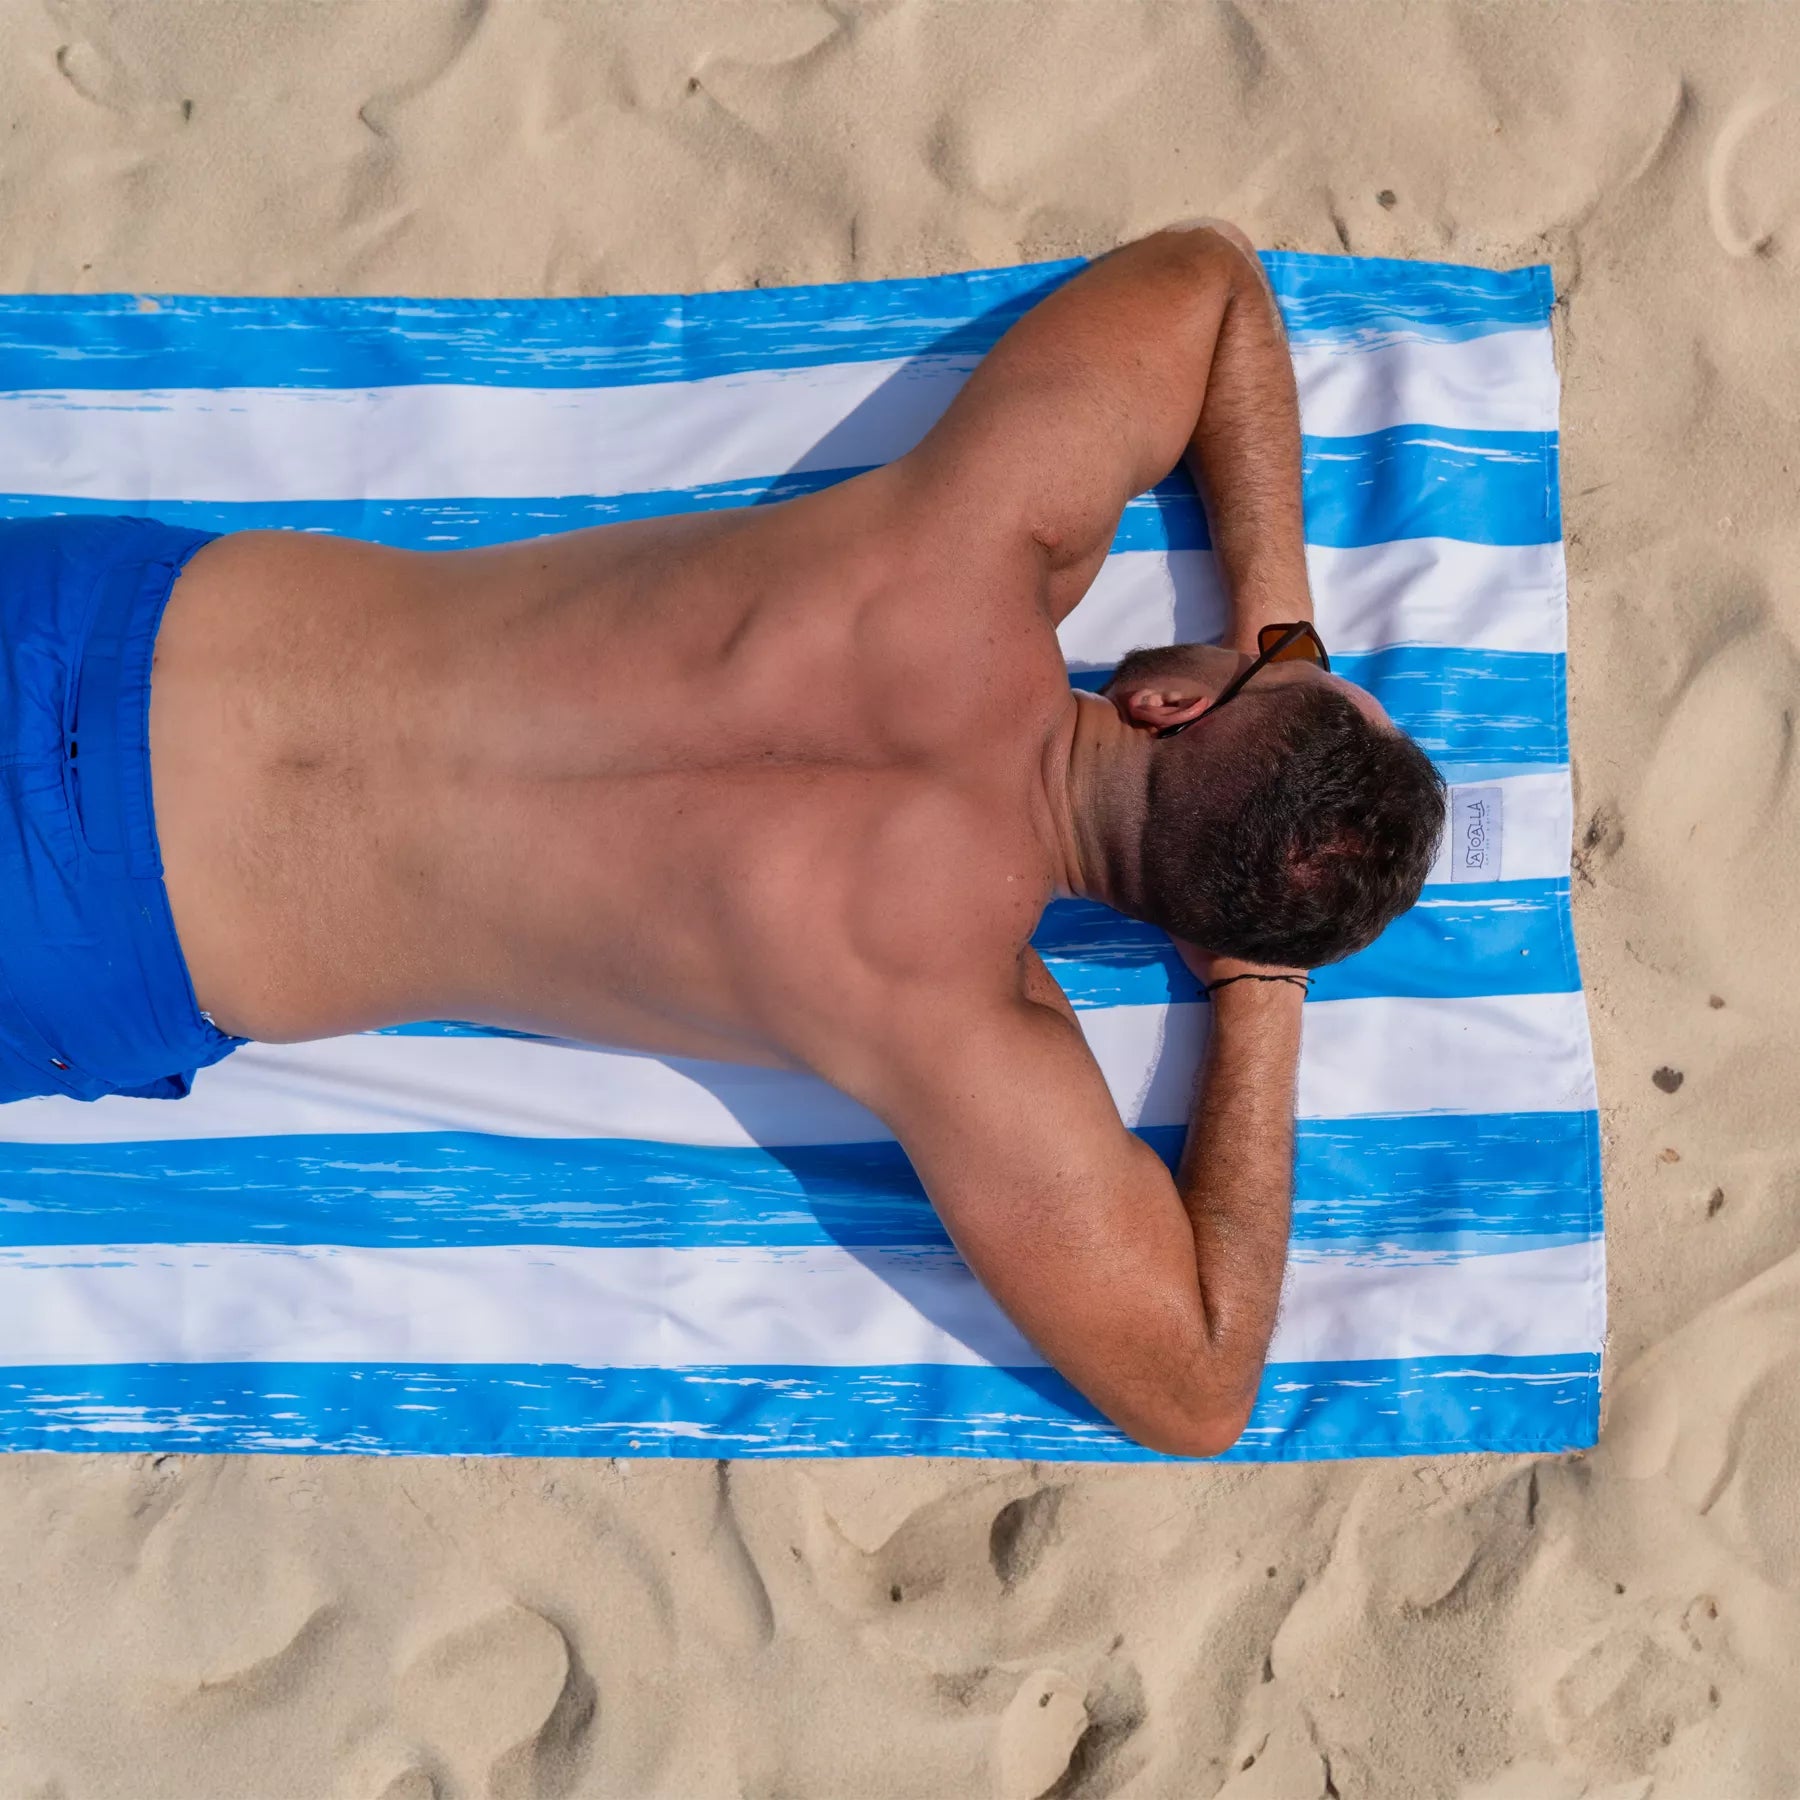 A guy sitting on a Quick Dry, Sand Free, Light Weight, Compact and Ecofriendly Microfiber Beach Towel from La Toalla on the sand